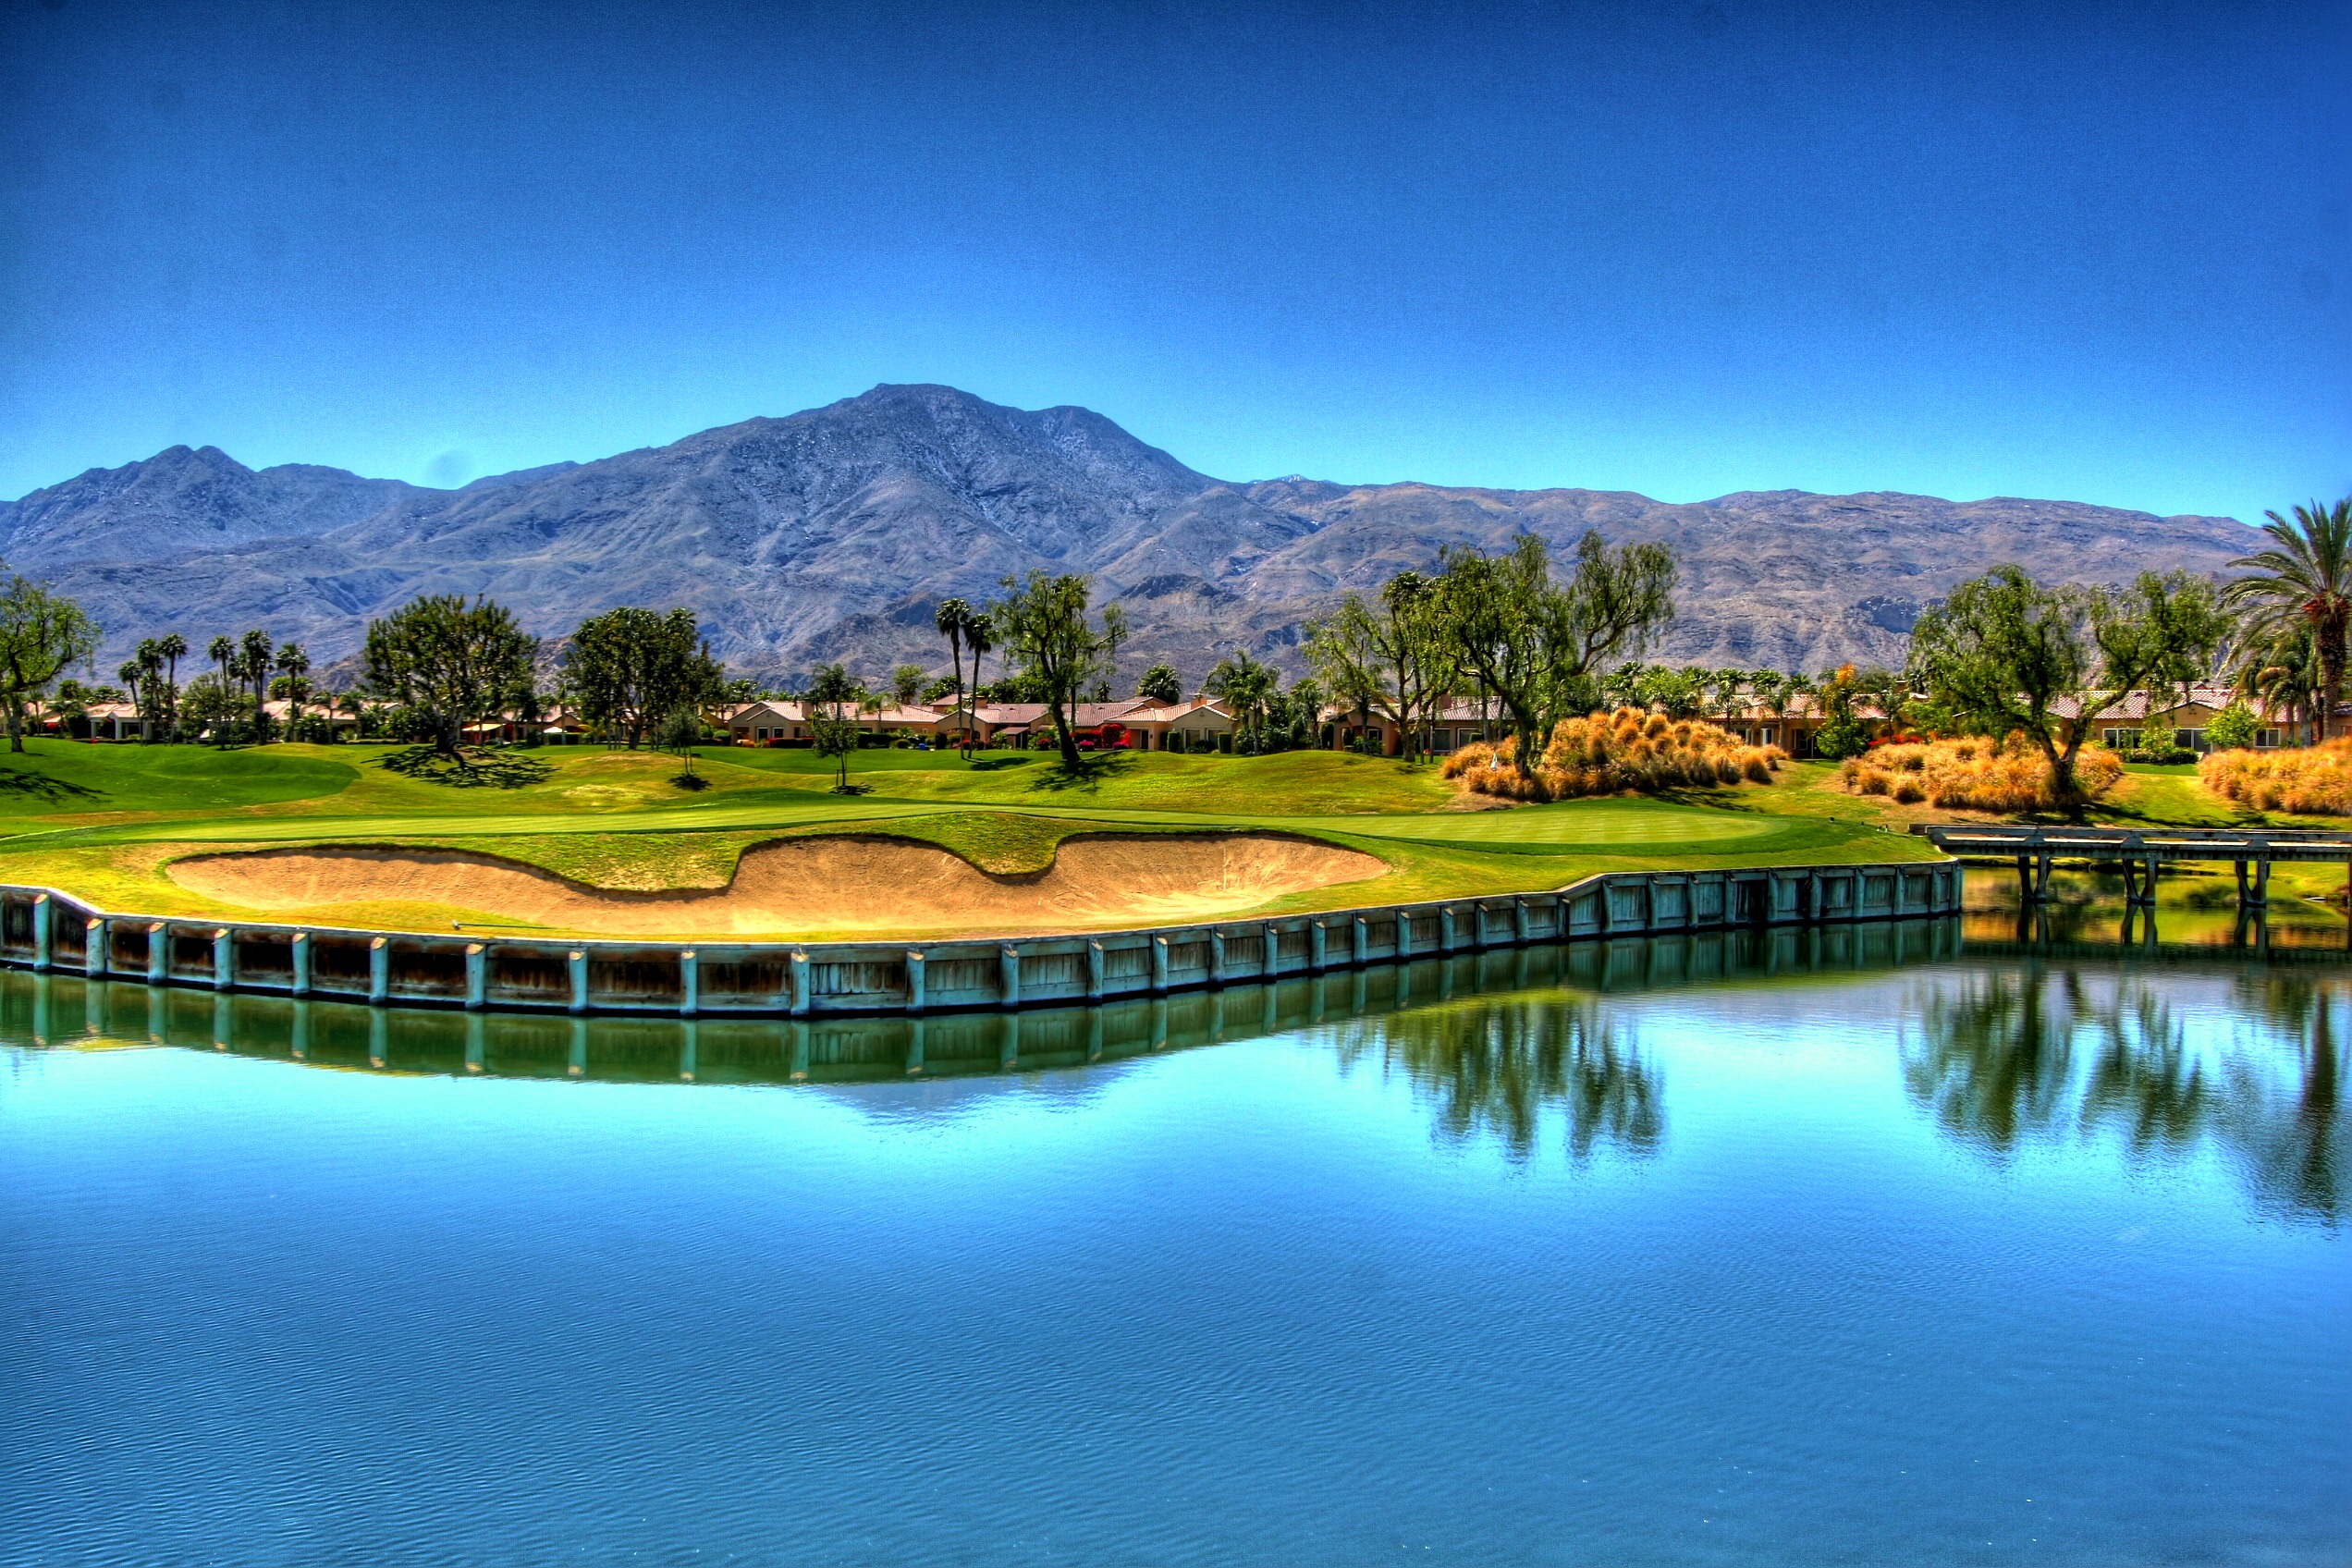 Golf Course Properties Offer Incredible Values There Are Over